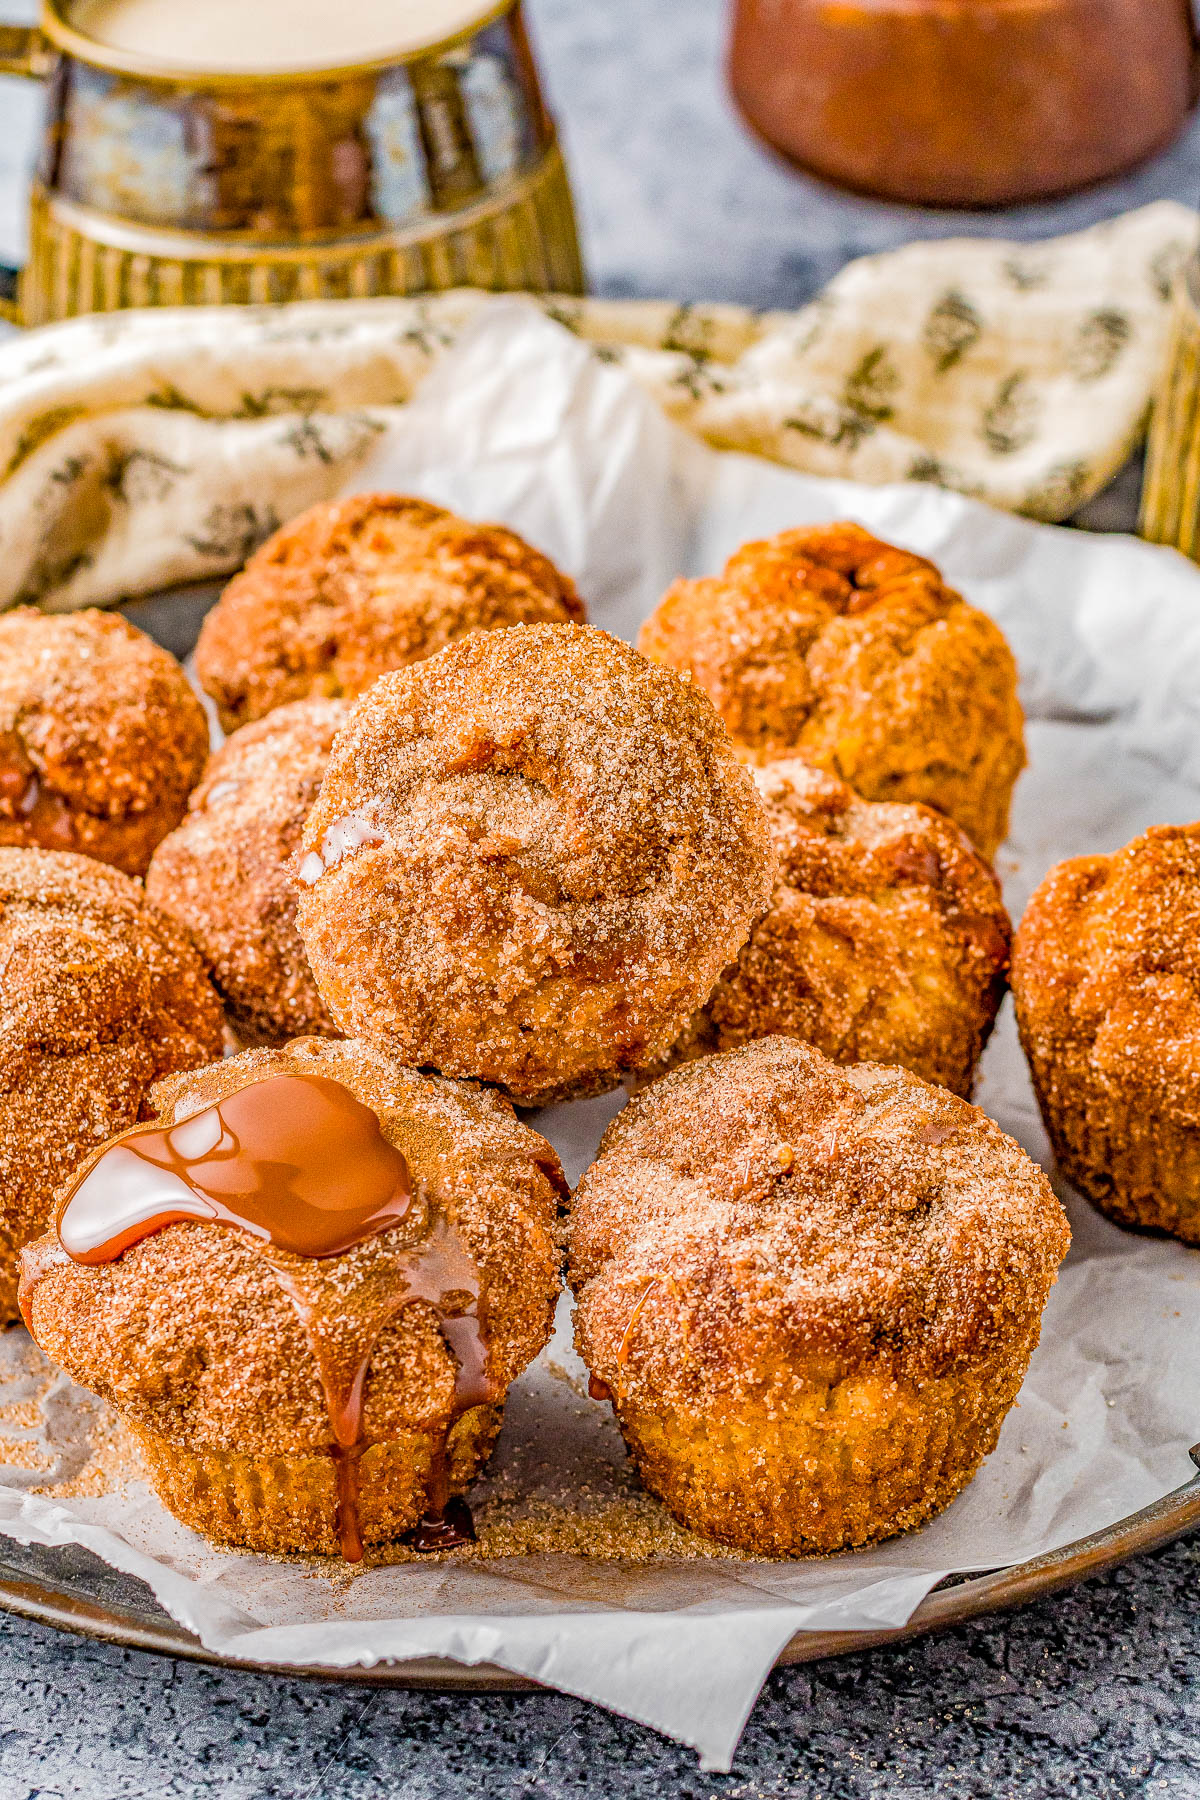 Dulce de Leche Churro Muffins - All the flavors and satisfaction of fresh churros but in muffin form with no frying involved! Brushed with melted butter, rolled in cinnamon-and-sugar, and filled with dulce de leche or caramel sauce, these FAST and EASY muffins are so soft, moist, and PERFECTLY decadent! 